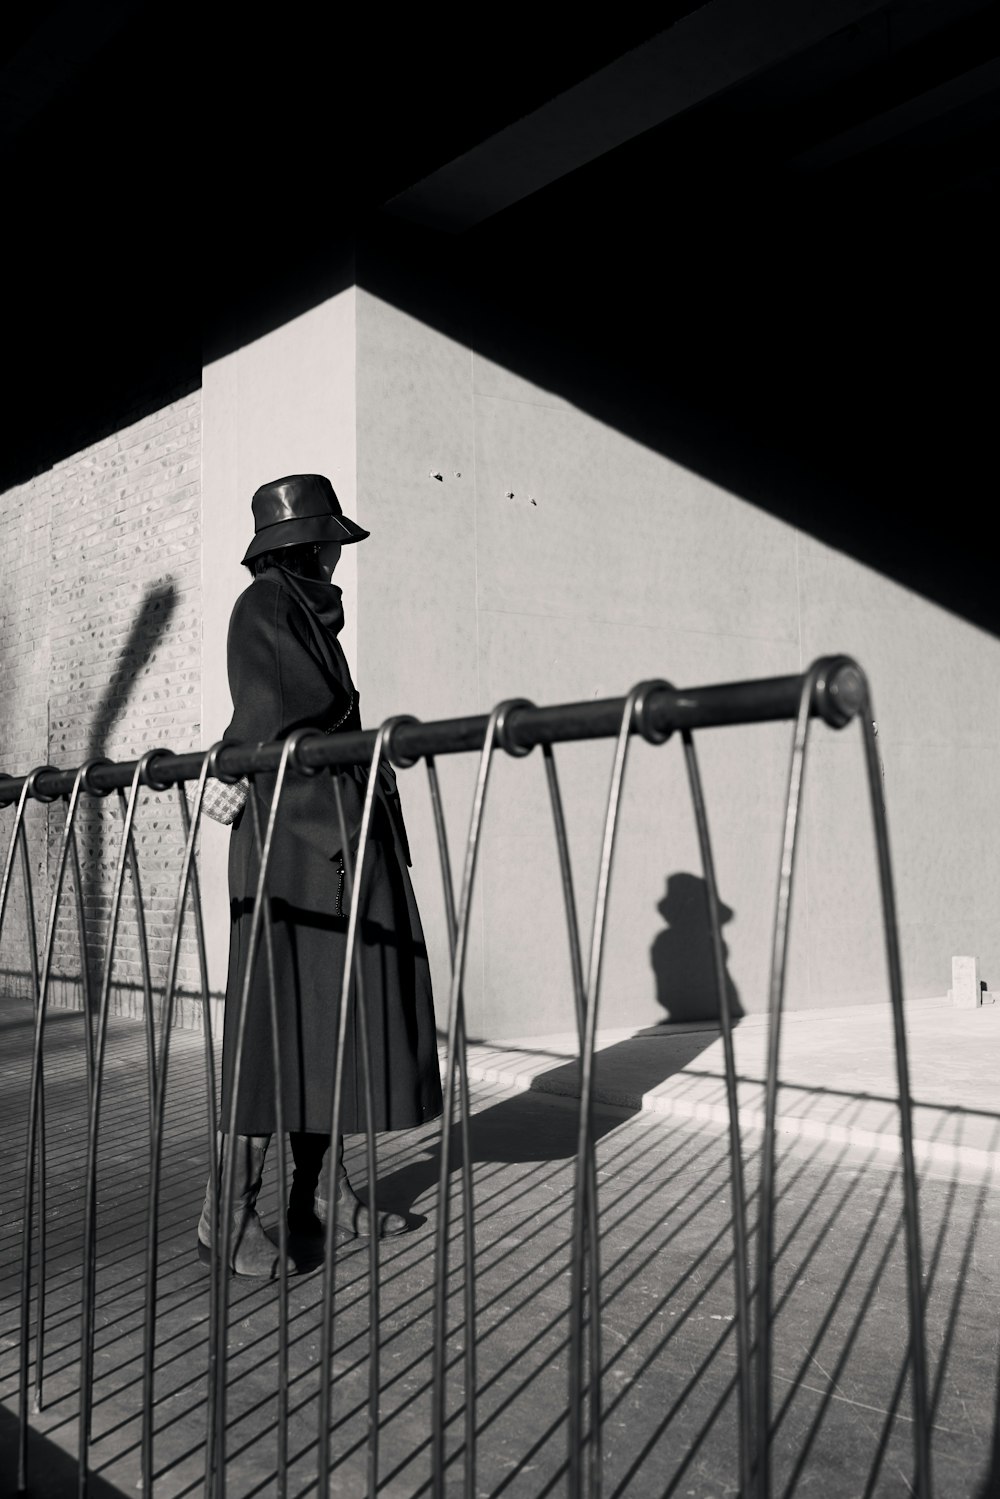 a man in a trench coat and hat standing on a fence